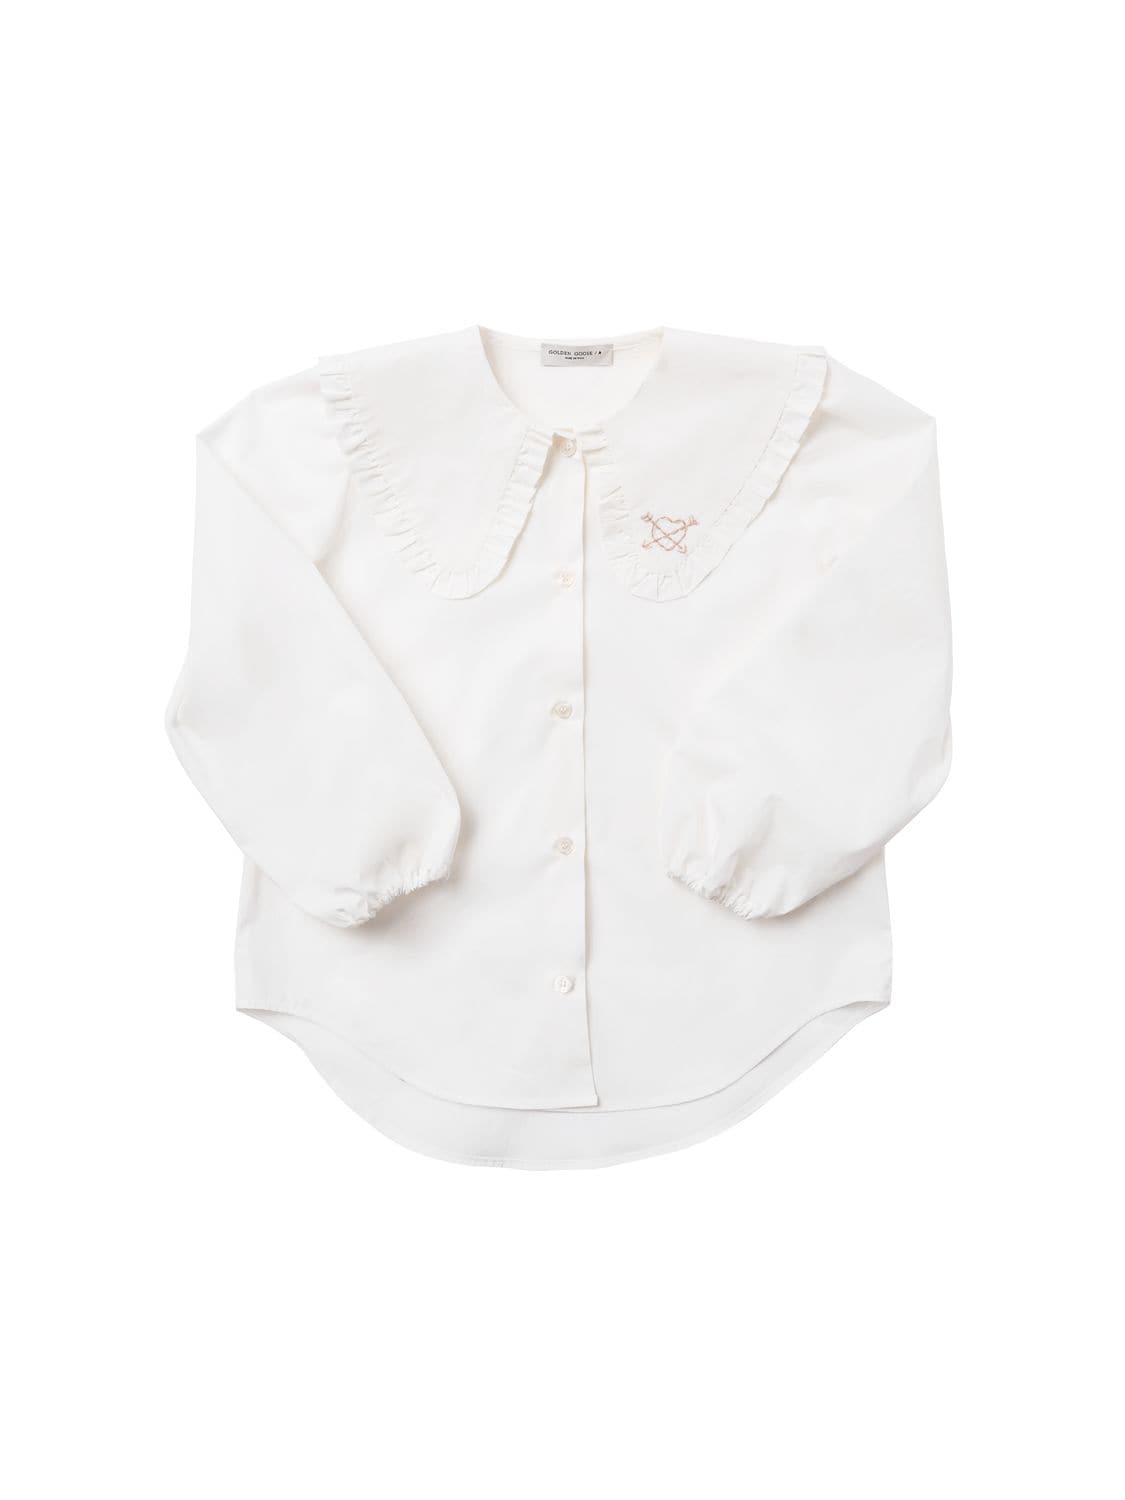 Image of Embroidered Cotton Poplin Shirt